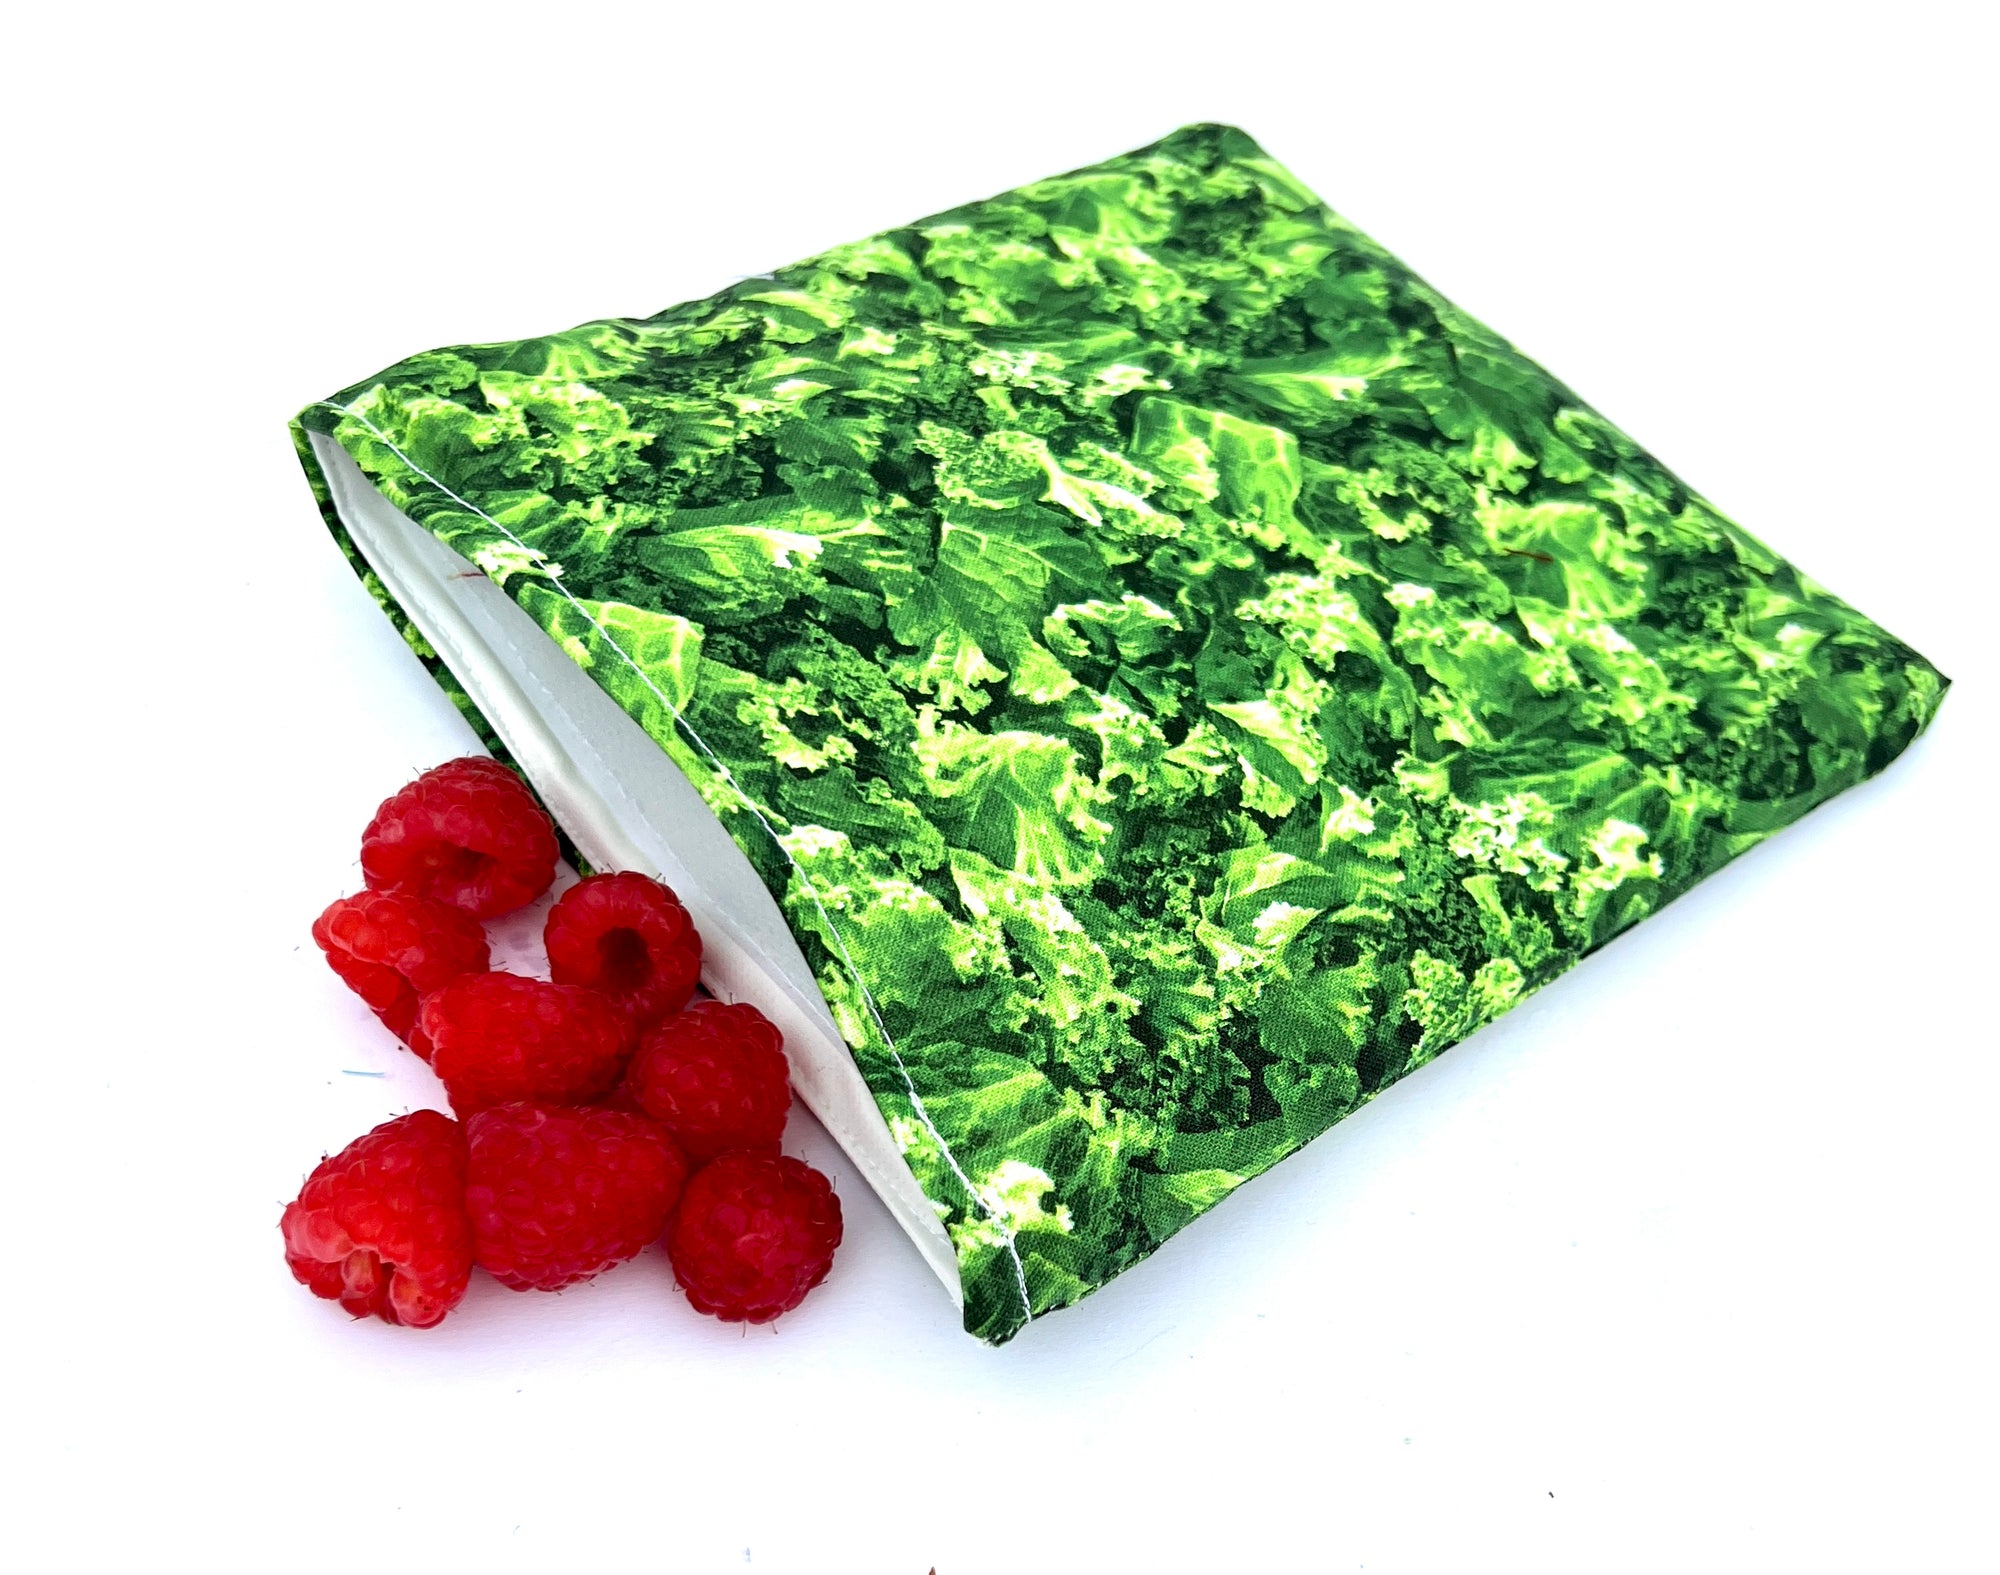 Reusable Sandwich bag Eco Friendly Tacos, Veggies, Sushi, Oysters, Avocados, Leafy Greens